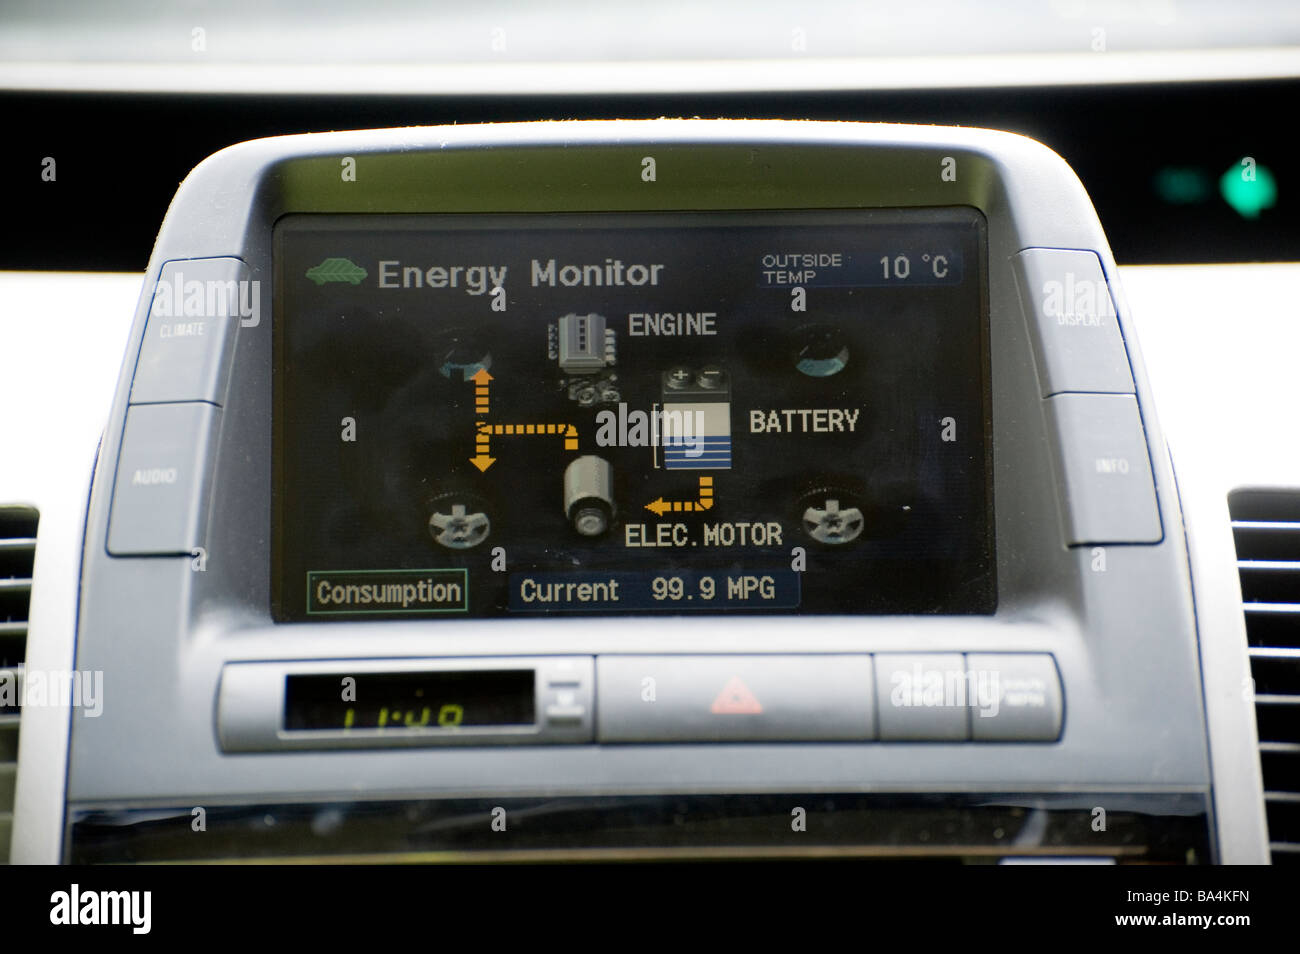 Energy distribution screen on the dashboard of a Toyota prius hybrid car Stock Photo